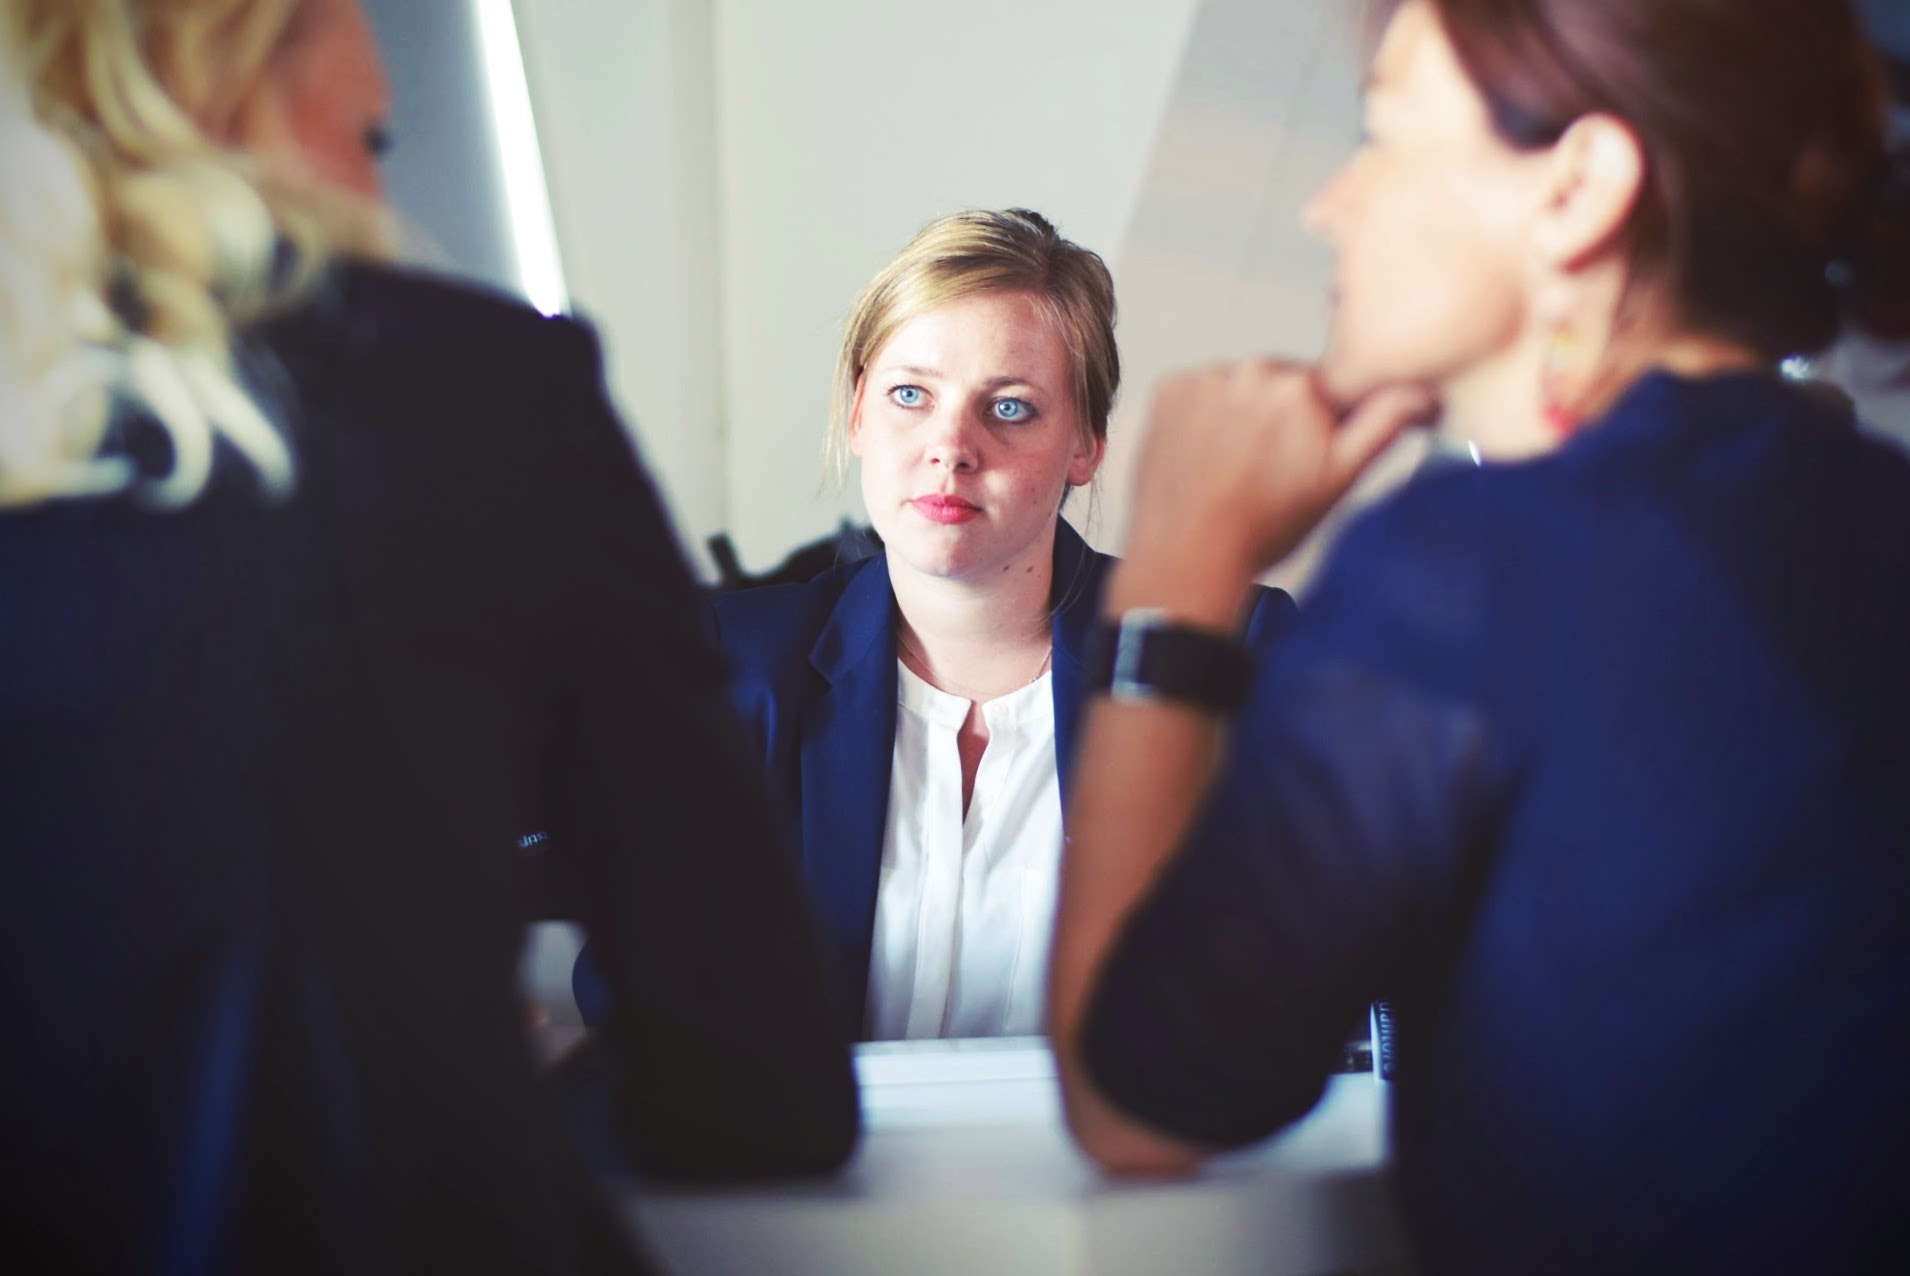 5 Interview Red Flags for Potentially Toxic Employers